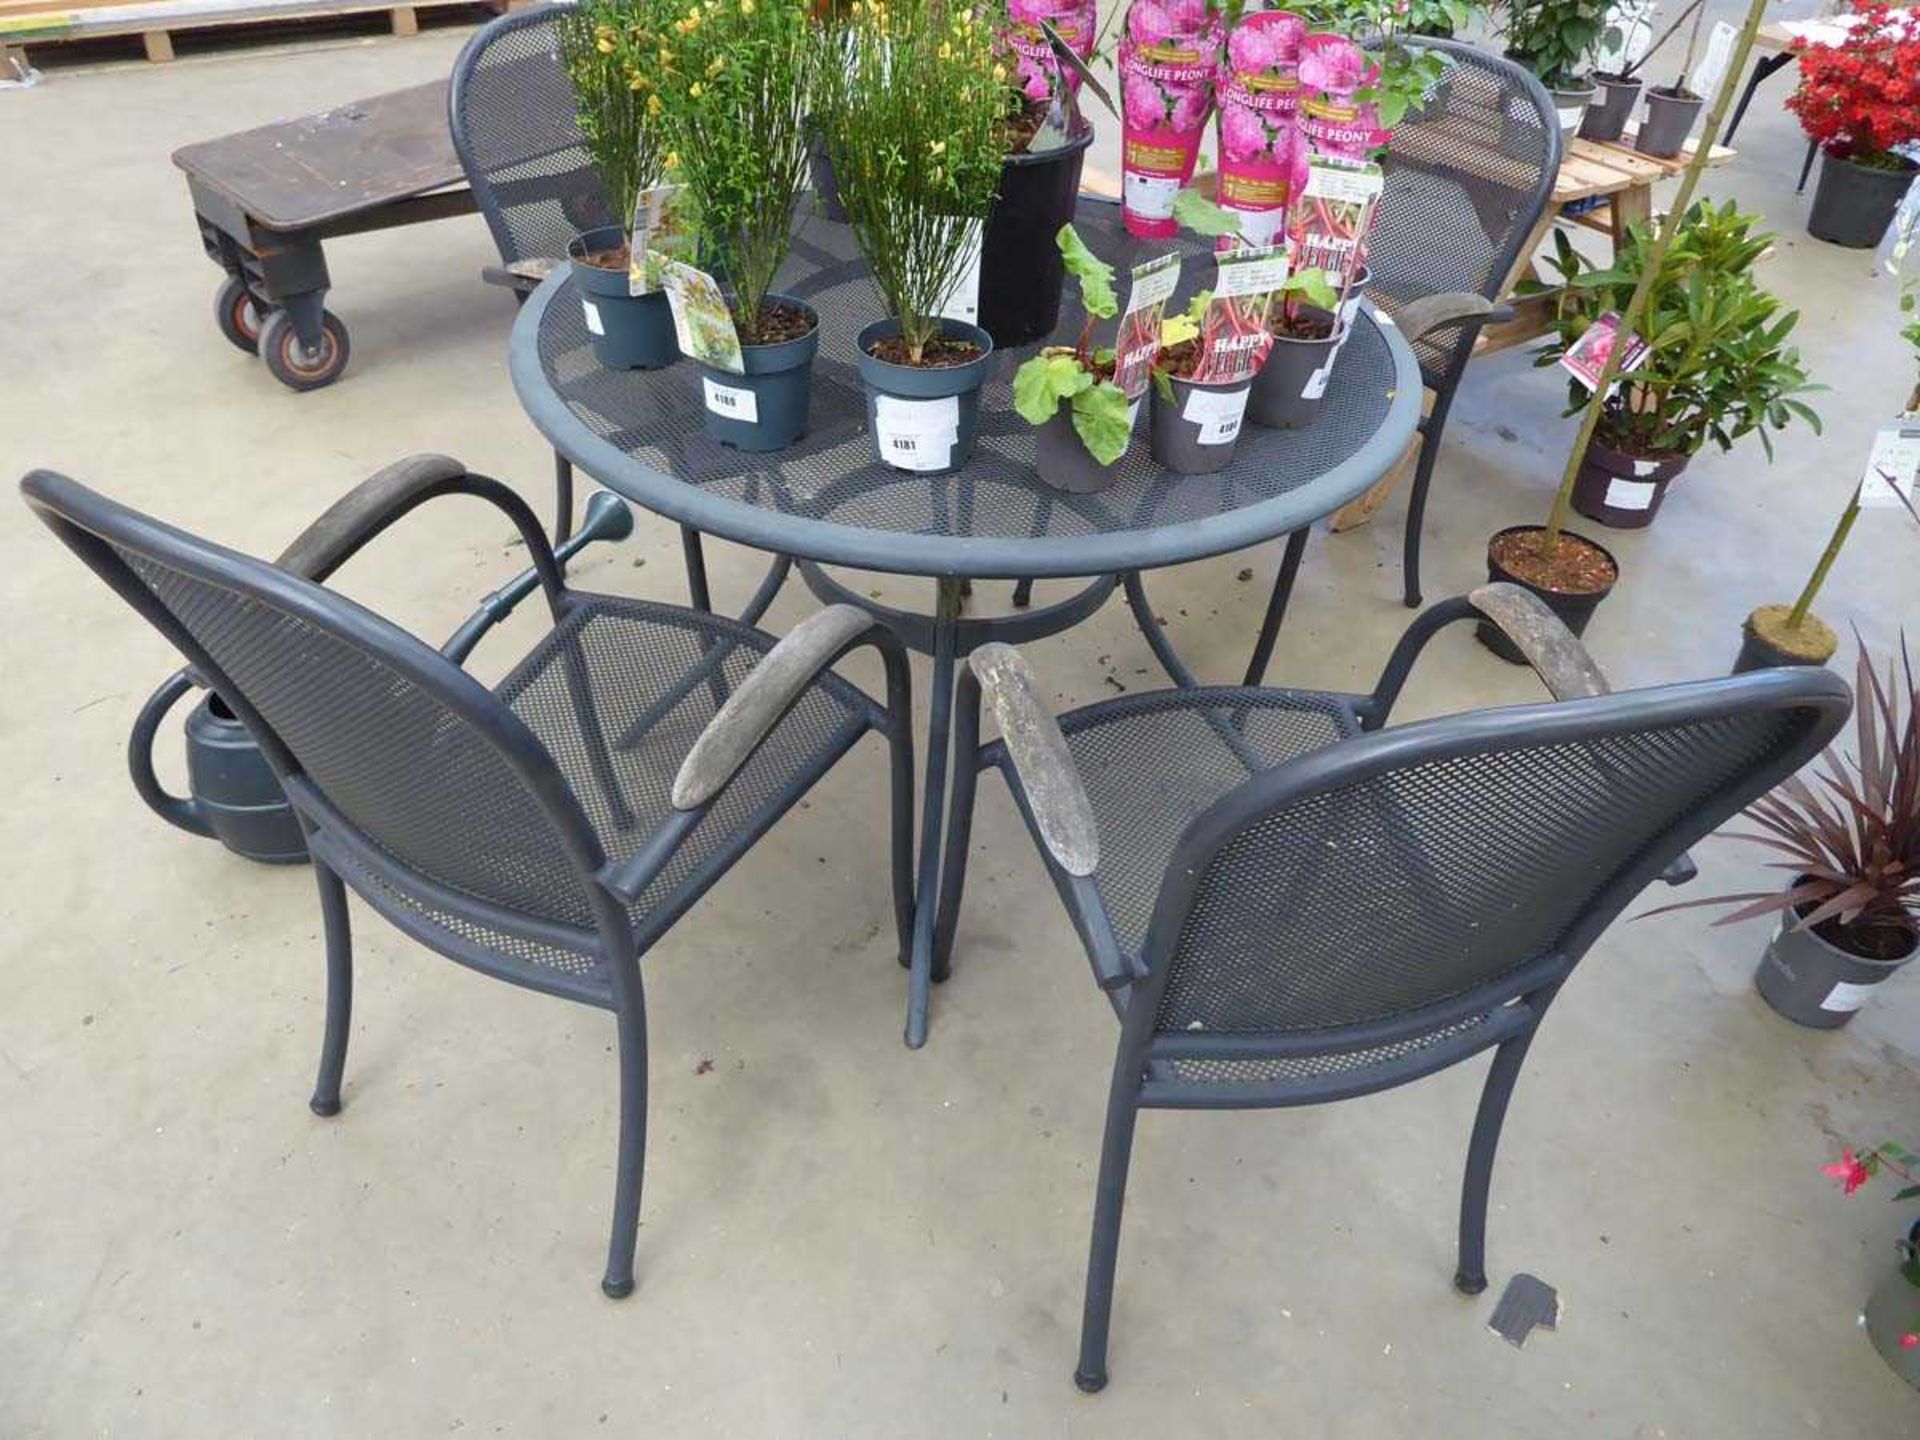 Metal mesh topped garden table and 4 chairs